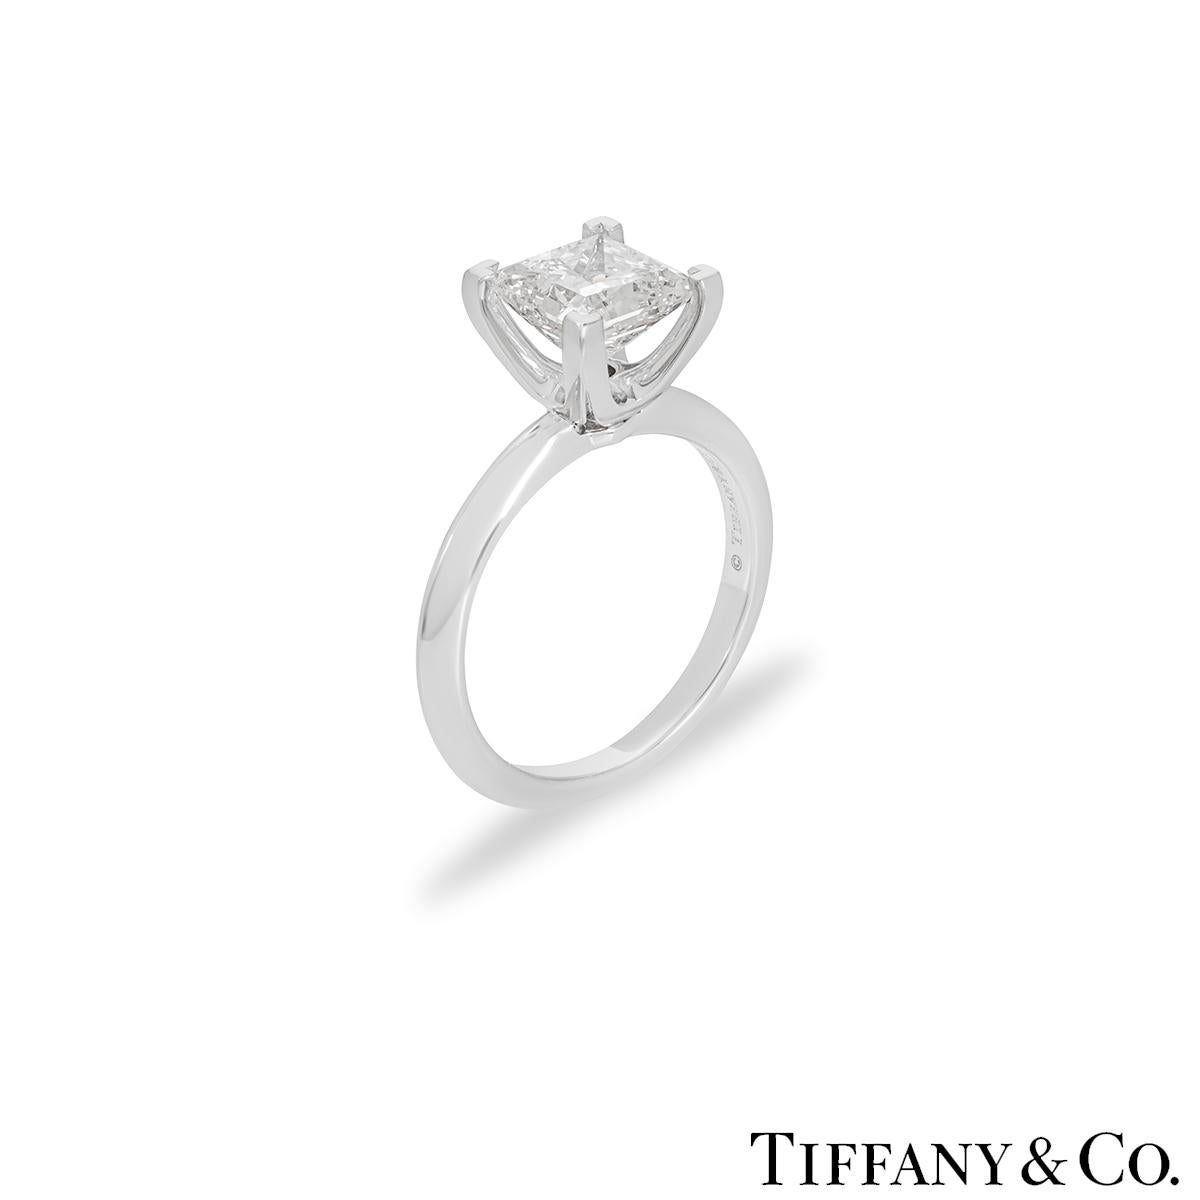 A beautiful platinum diamond ring by Tiffany & Co. The ring comprises of a princess cut diamond in a 4 claw setting with a total weight of 2.04ct, F colour and VS1 clarity. The diamond scores an excellent rating in all three aspects for cut, polish,